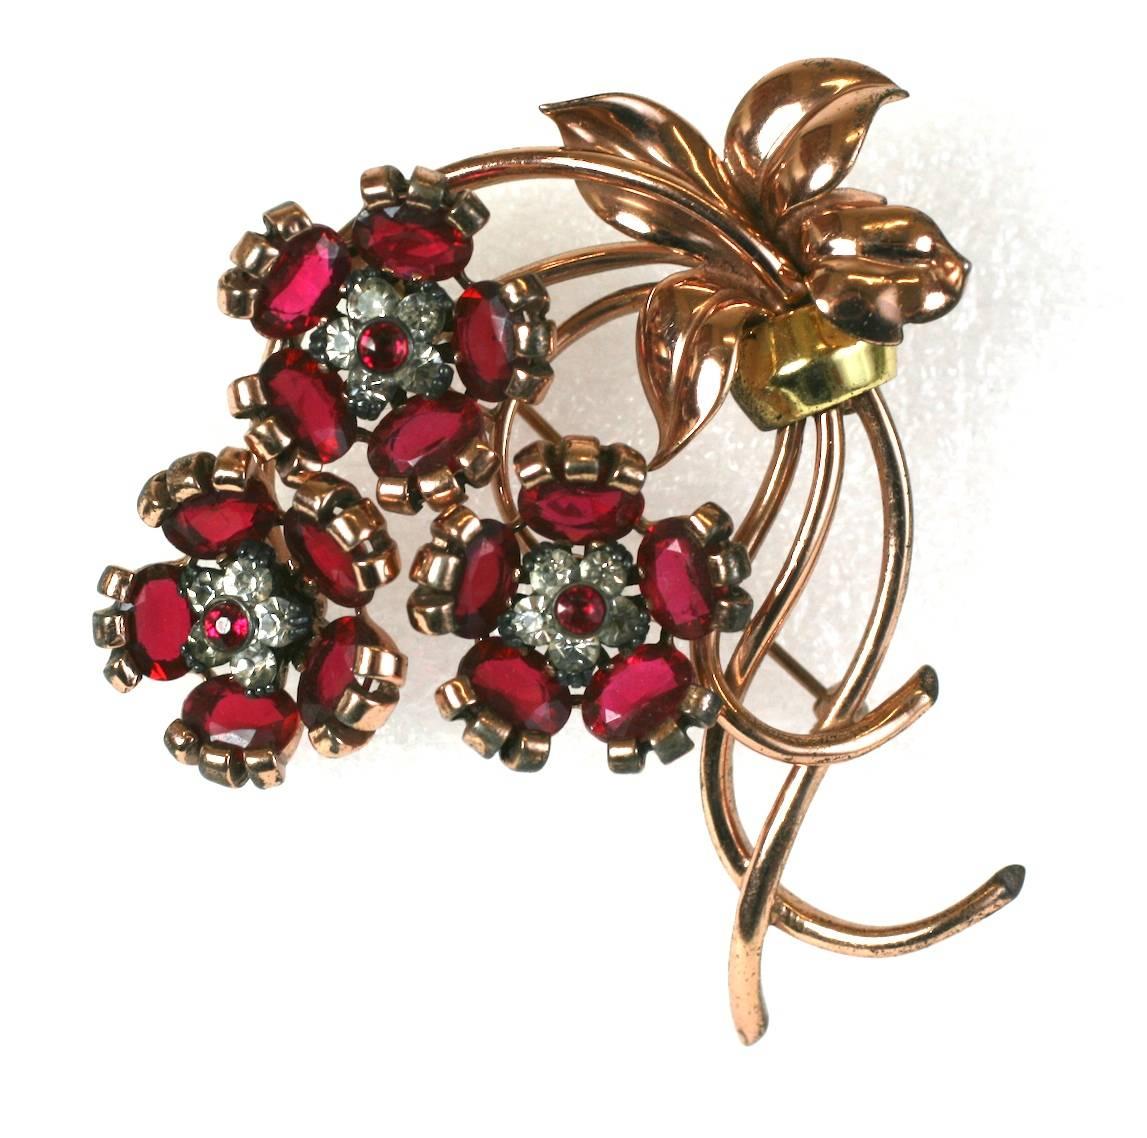 Wonderful Pennino Retro rose gold washed sterling silver, triple faux ruby floret and leaf cluster brooch of faceted oval stones, bullet cabochons centers and crystal pave accents.  Excellent Condition. Large and dimensional design.  1940's USA.